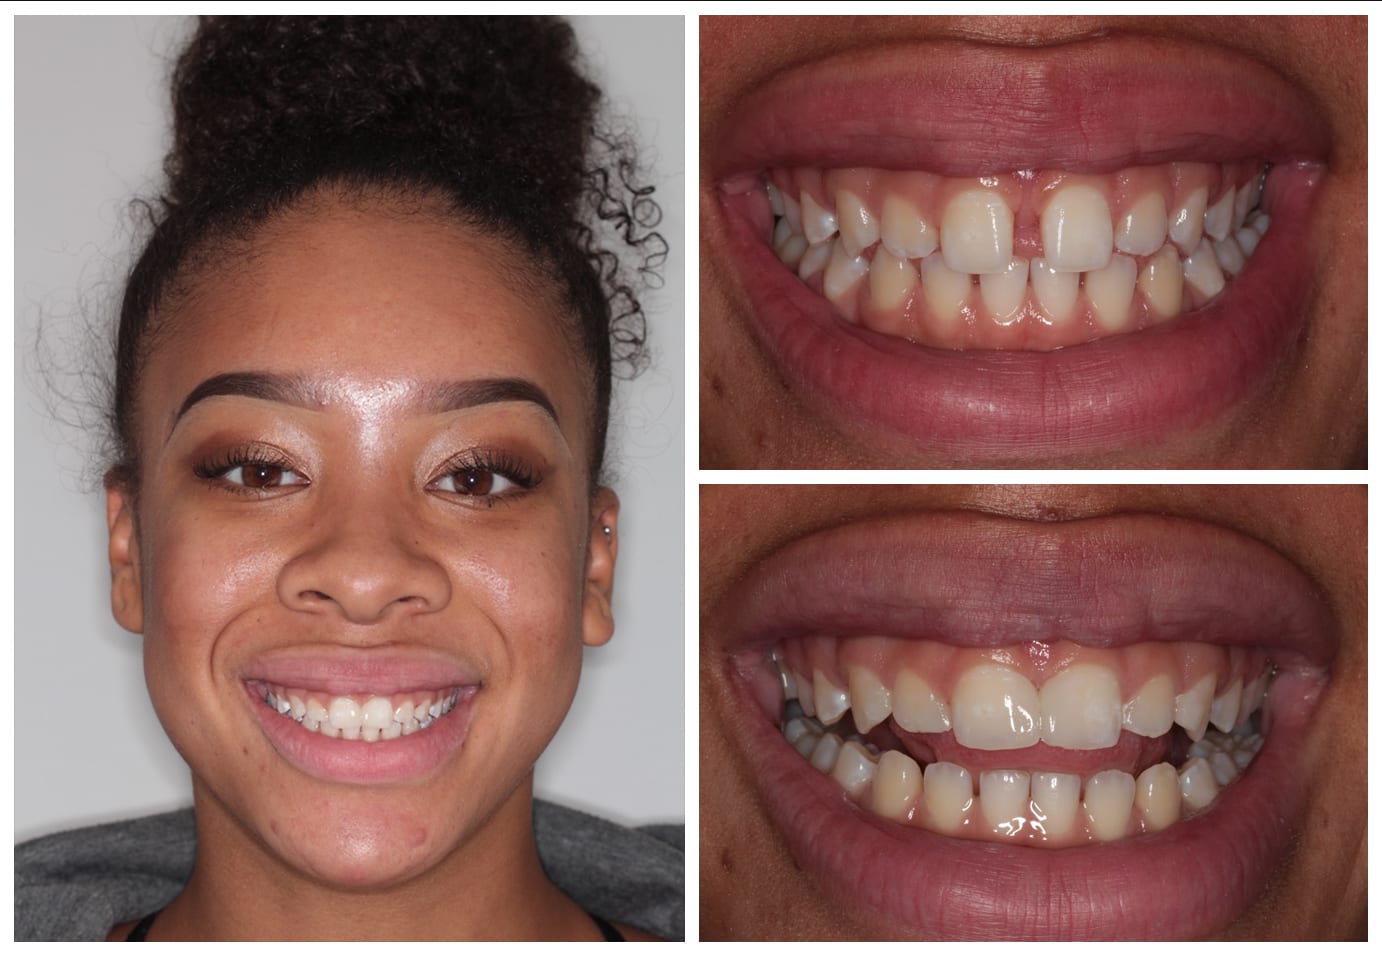 Before and after photo cosmetic dentistry